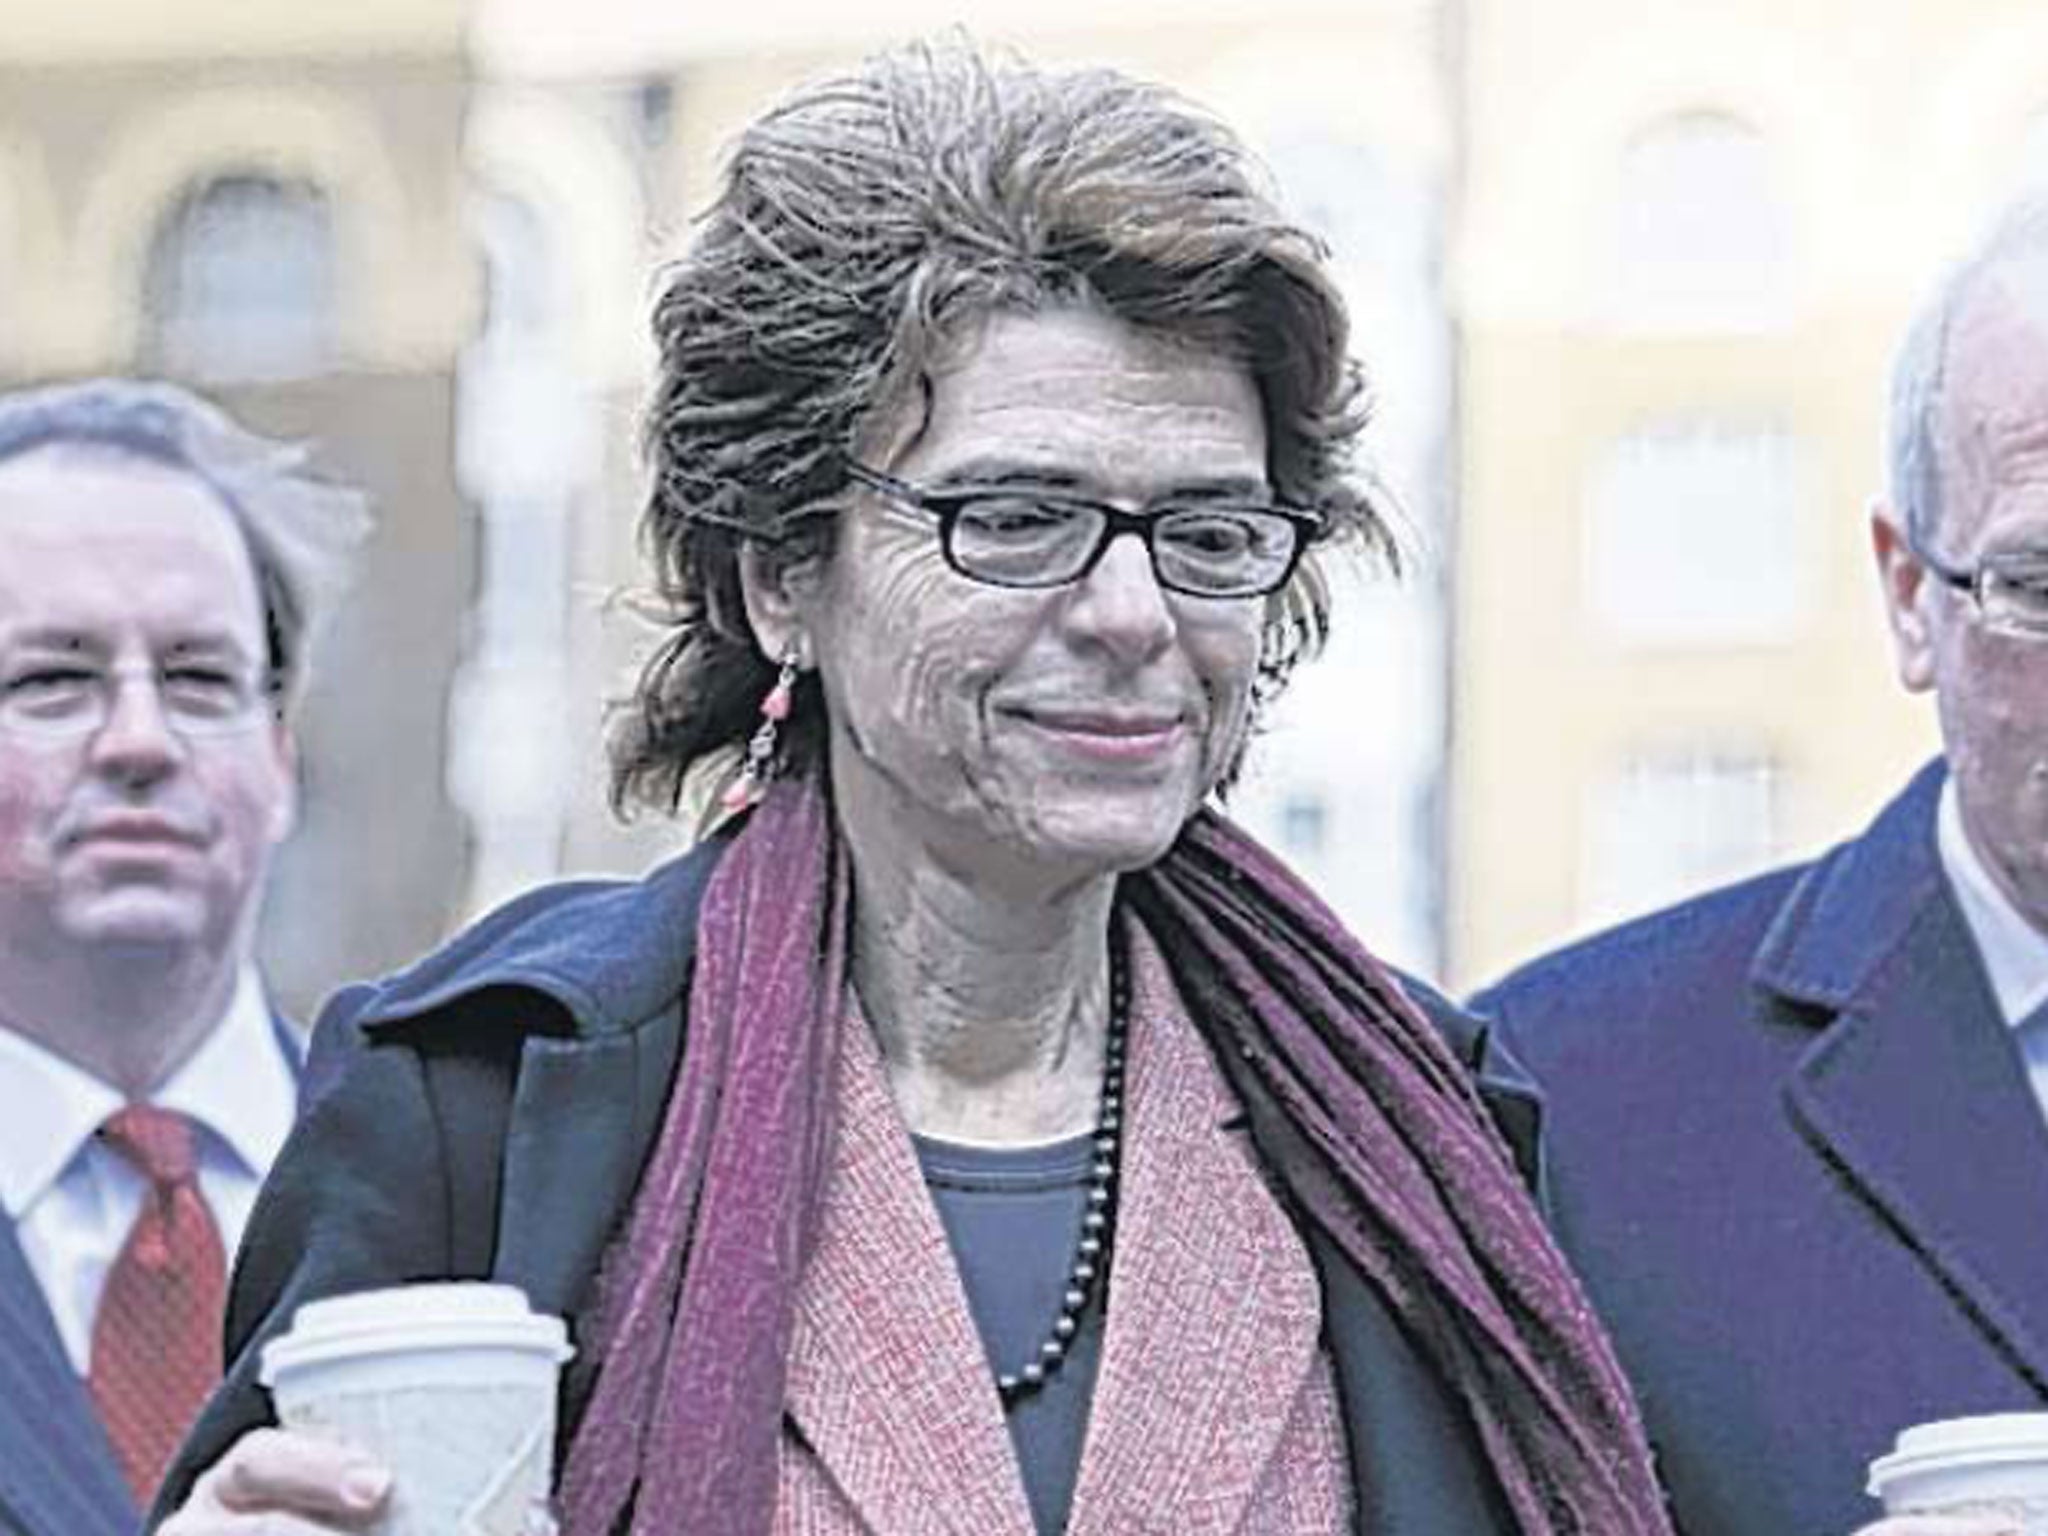 Vicky Pryce leaves Southwark Crown Court yesterday. She denies perverting the course of justice and her trial starts today